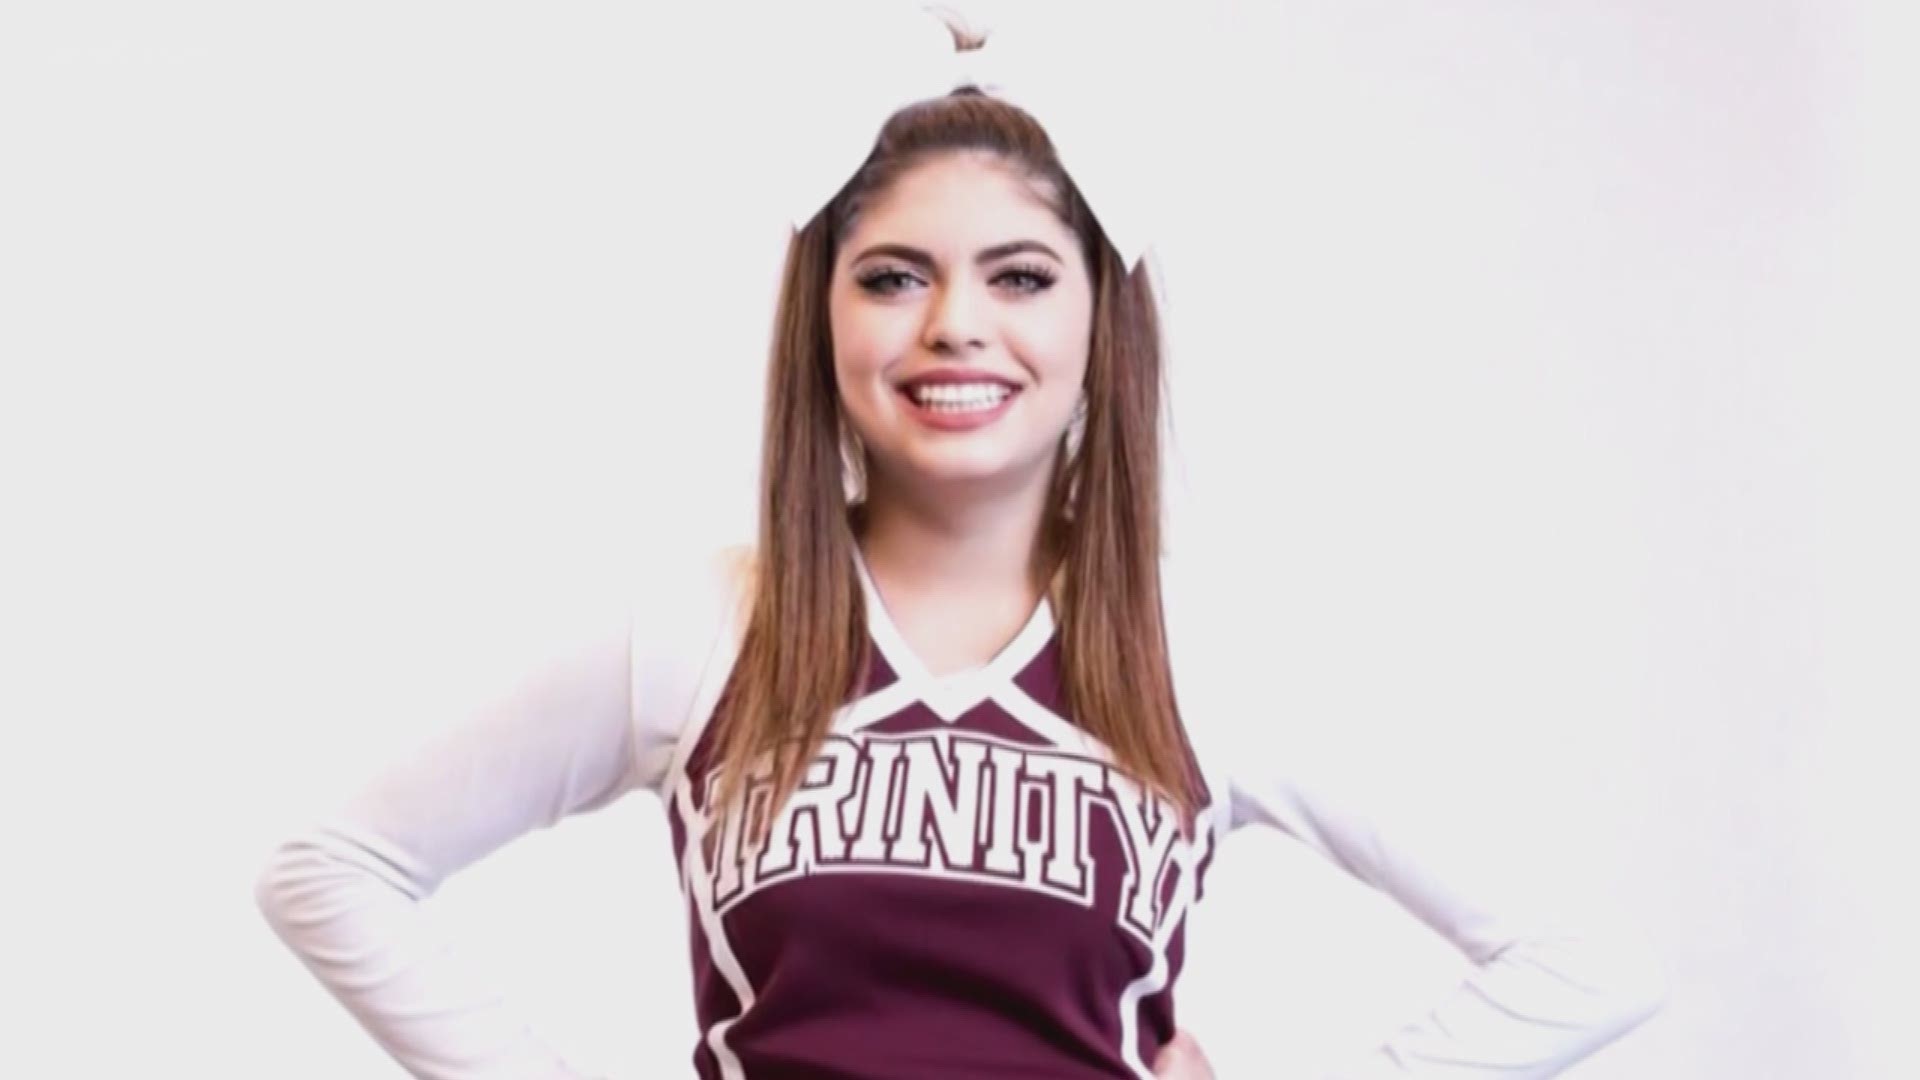 The trial continues today for Mark Howerton, the man suspected of killing Trinity University cheerleaded Cayley Mandadi.